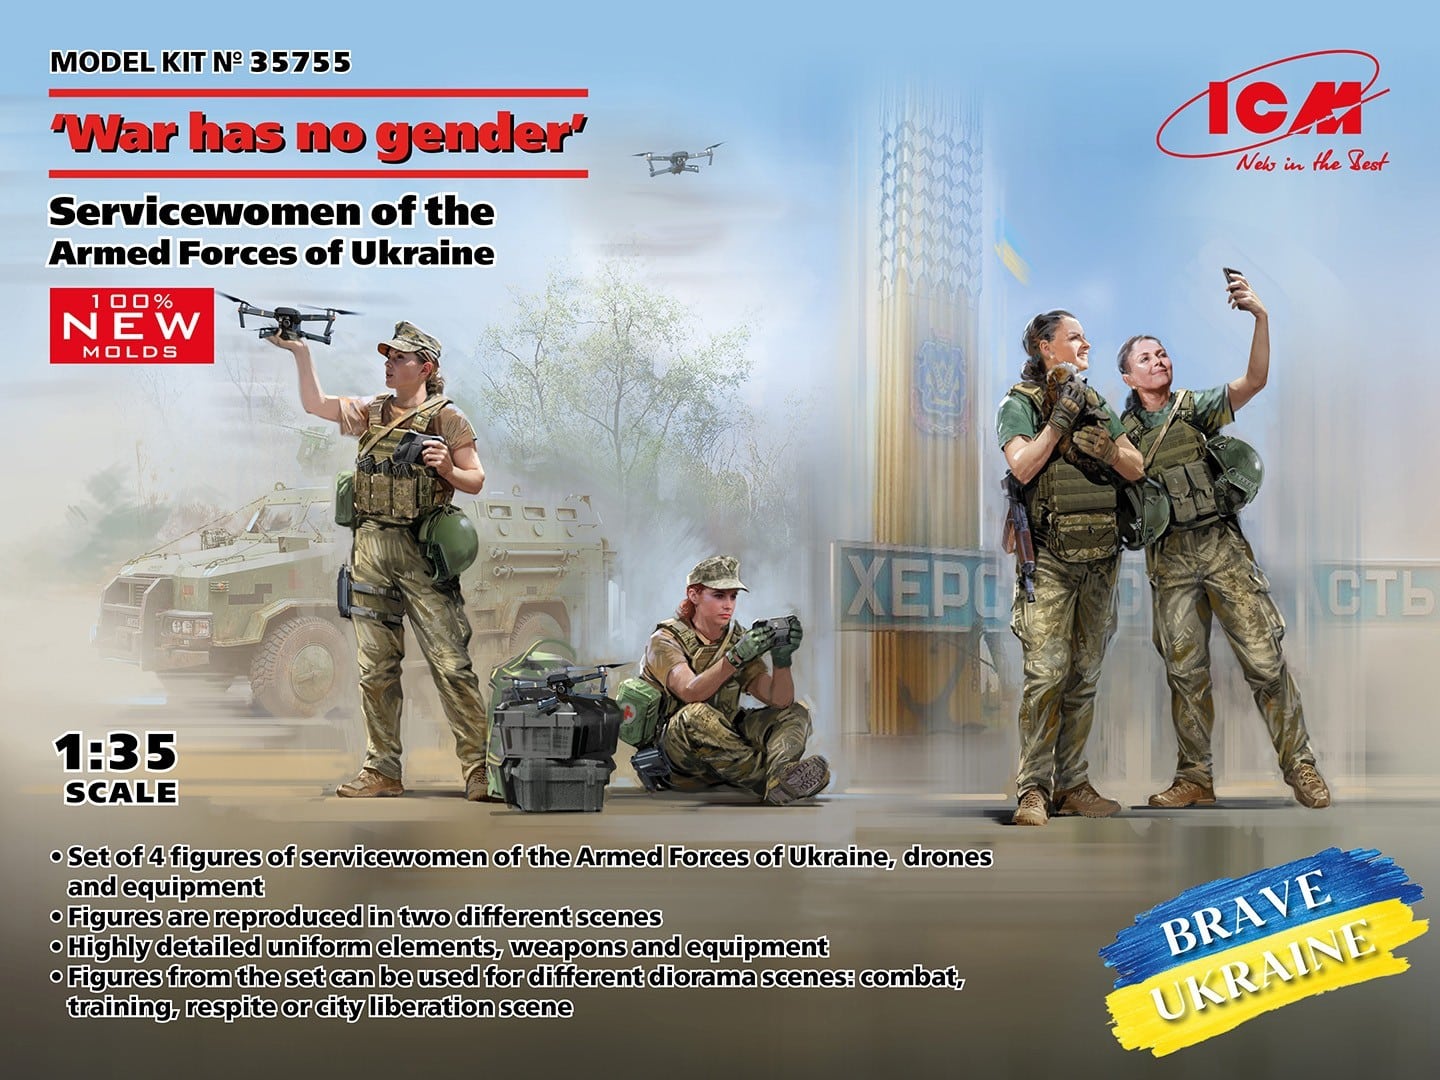 SOON ON SALE! “War has no gender” Servicewomen of the Armed Forces of Ukraine